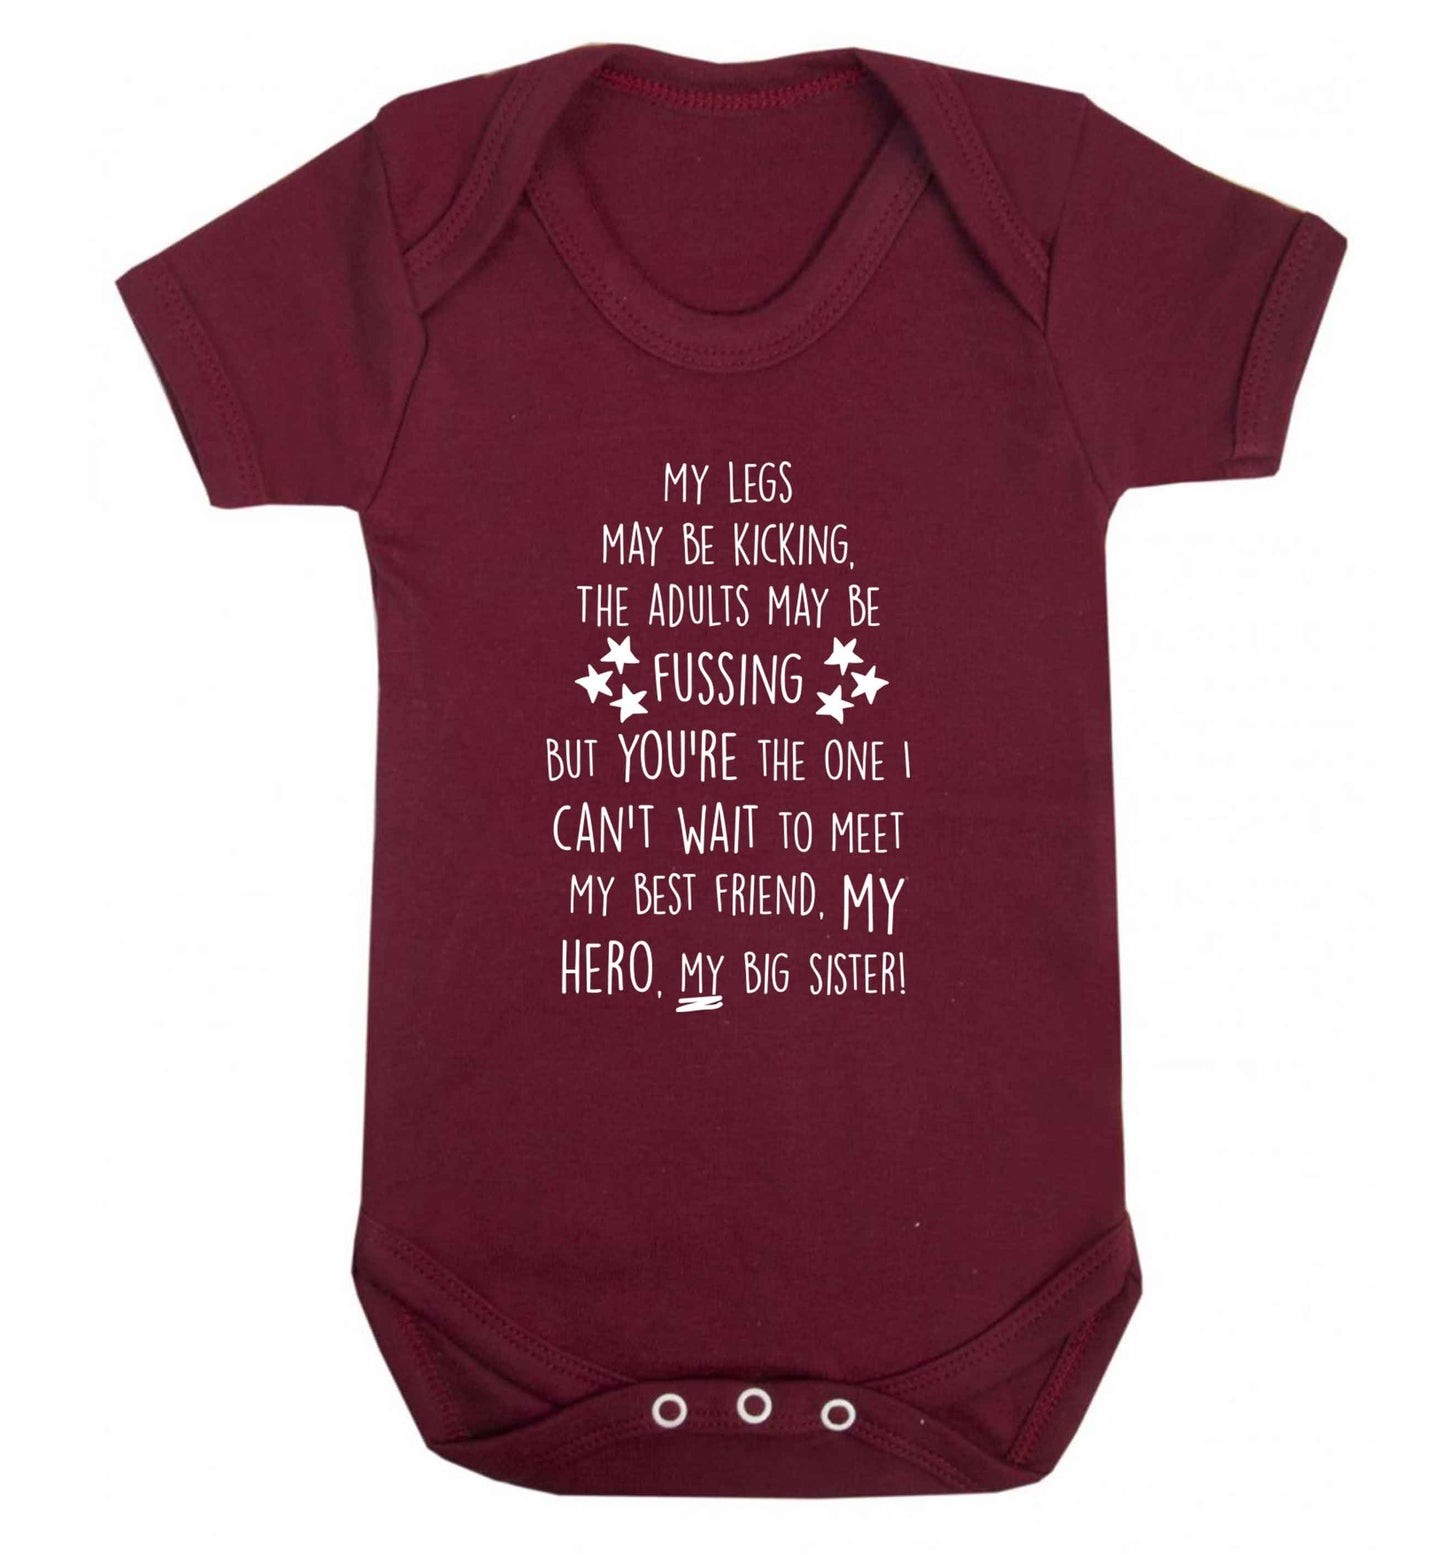 A poem from bump to big sister Baby Vest maroon 18-24 months